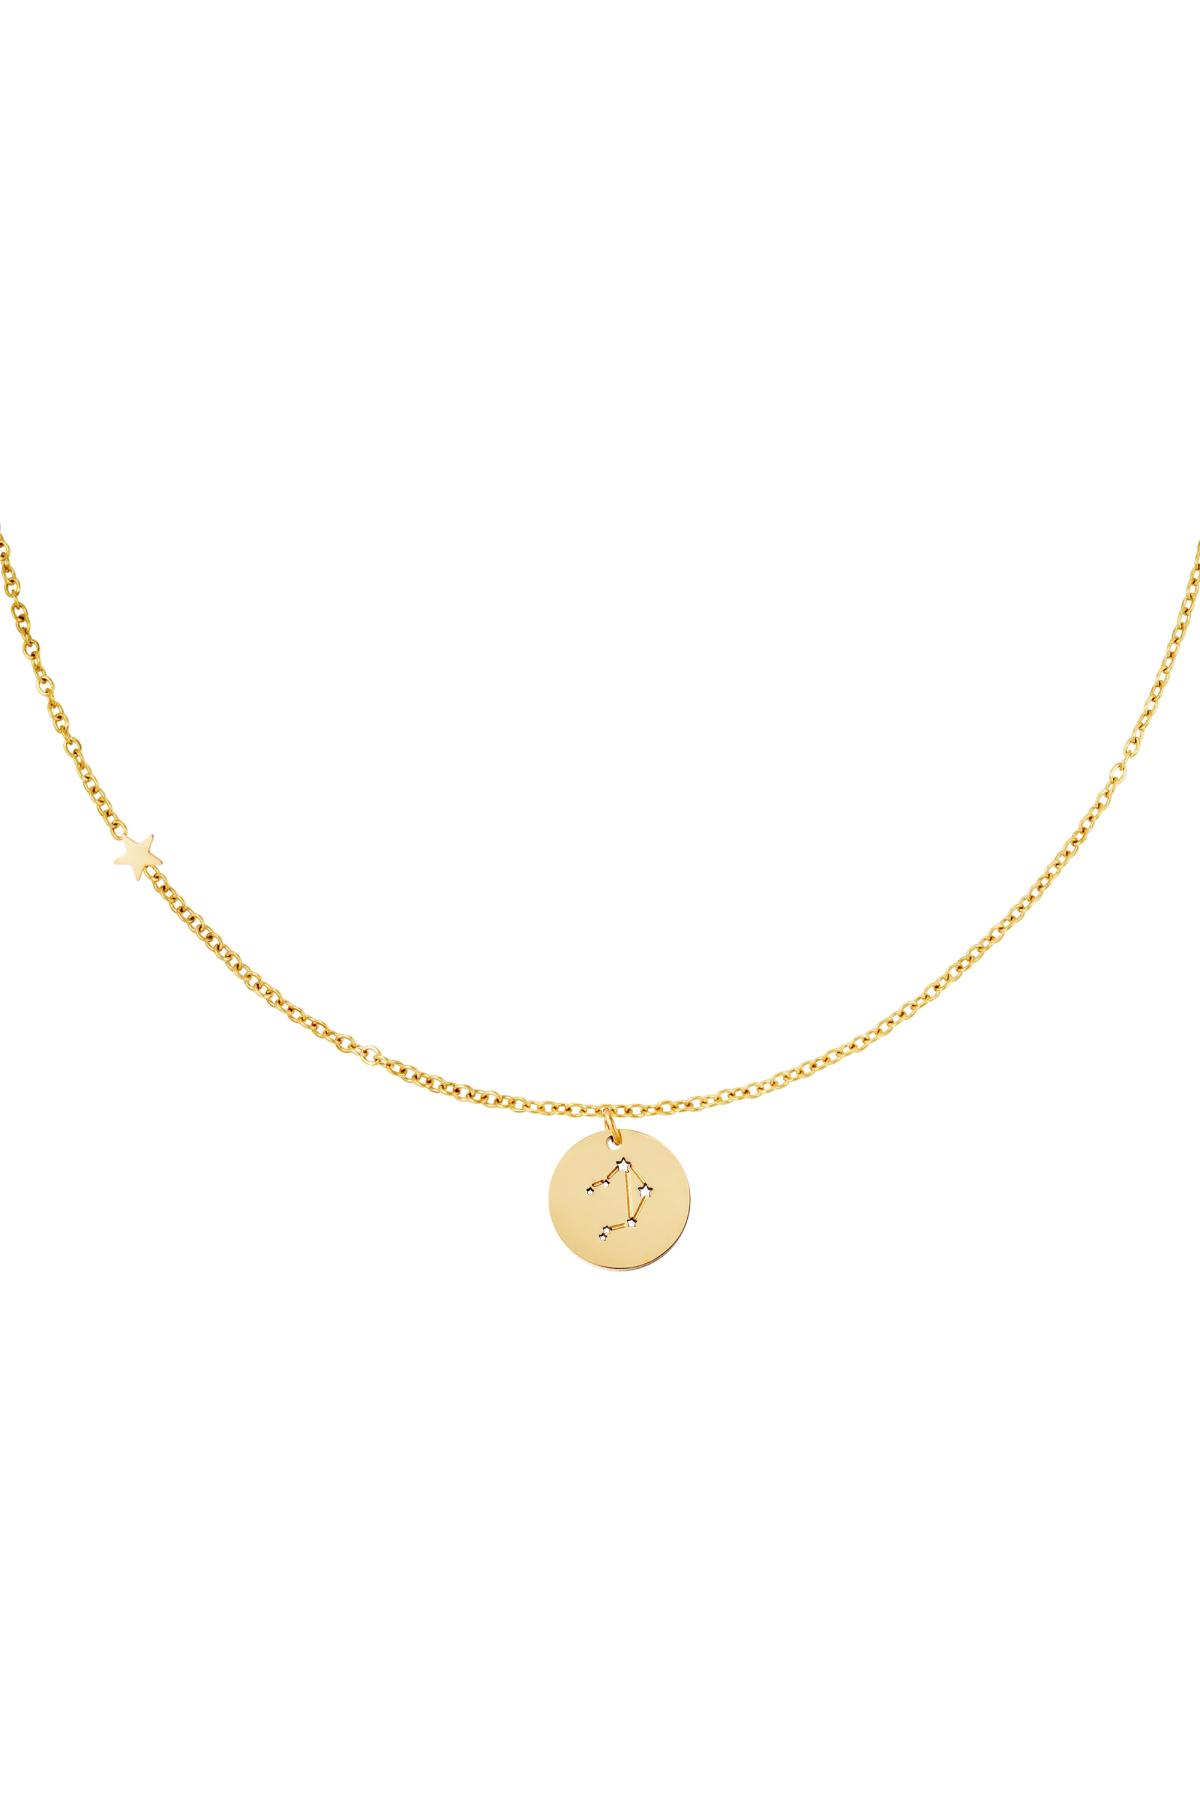 Necklace zodiac sign Libra Gold Stainless Steel